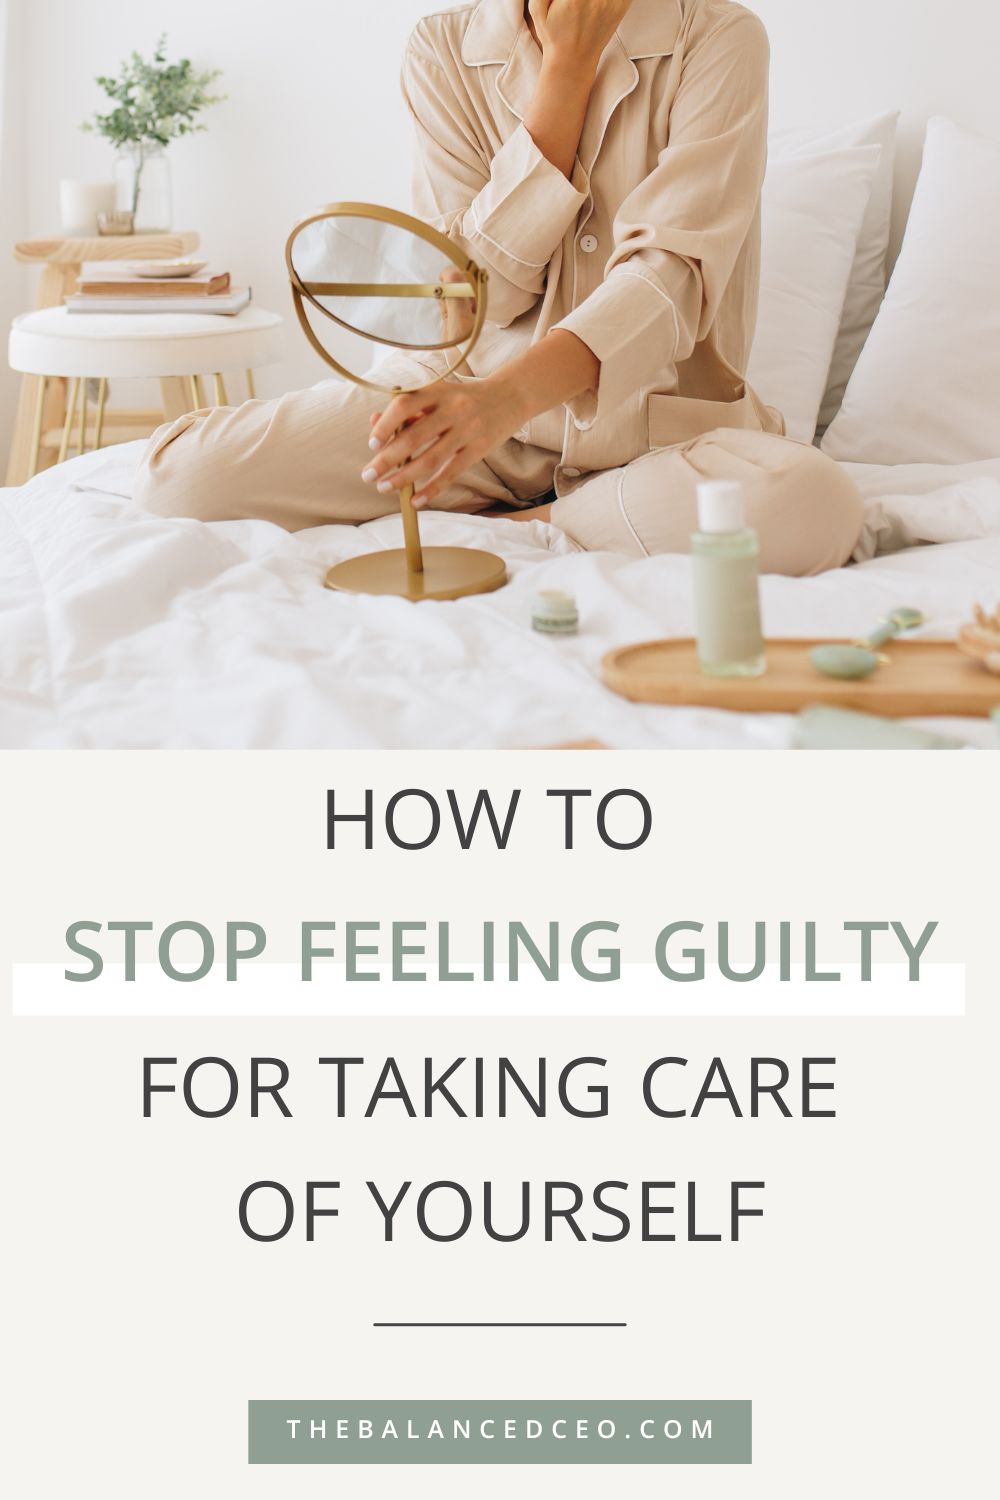 How to Stop Feeling Guilty for Taking Care of Yourself